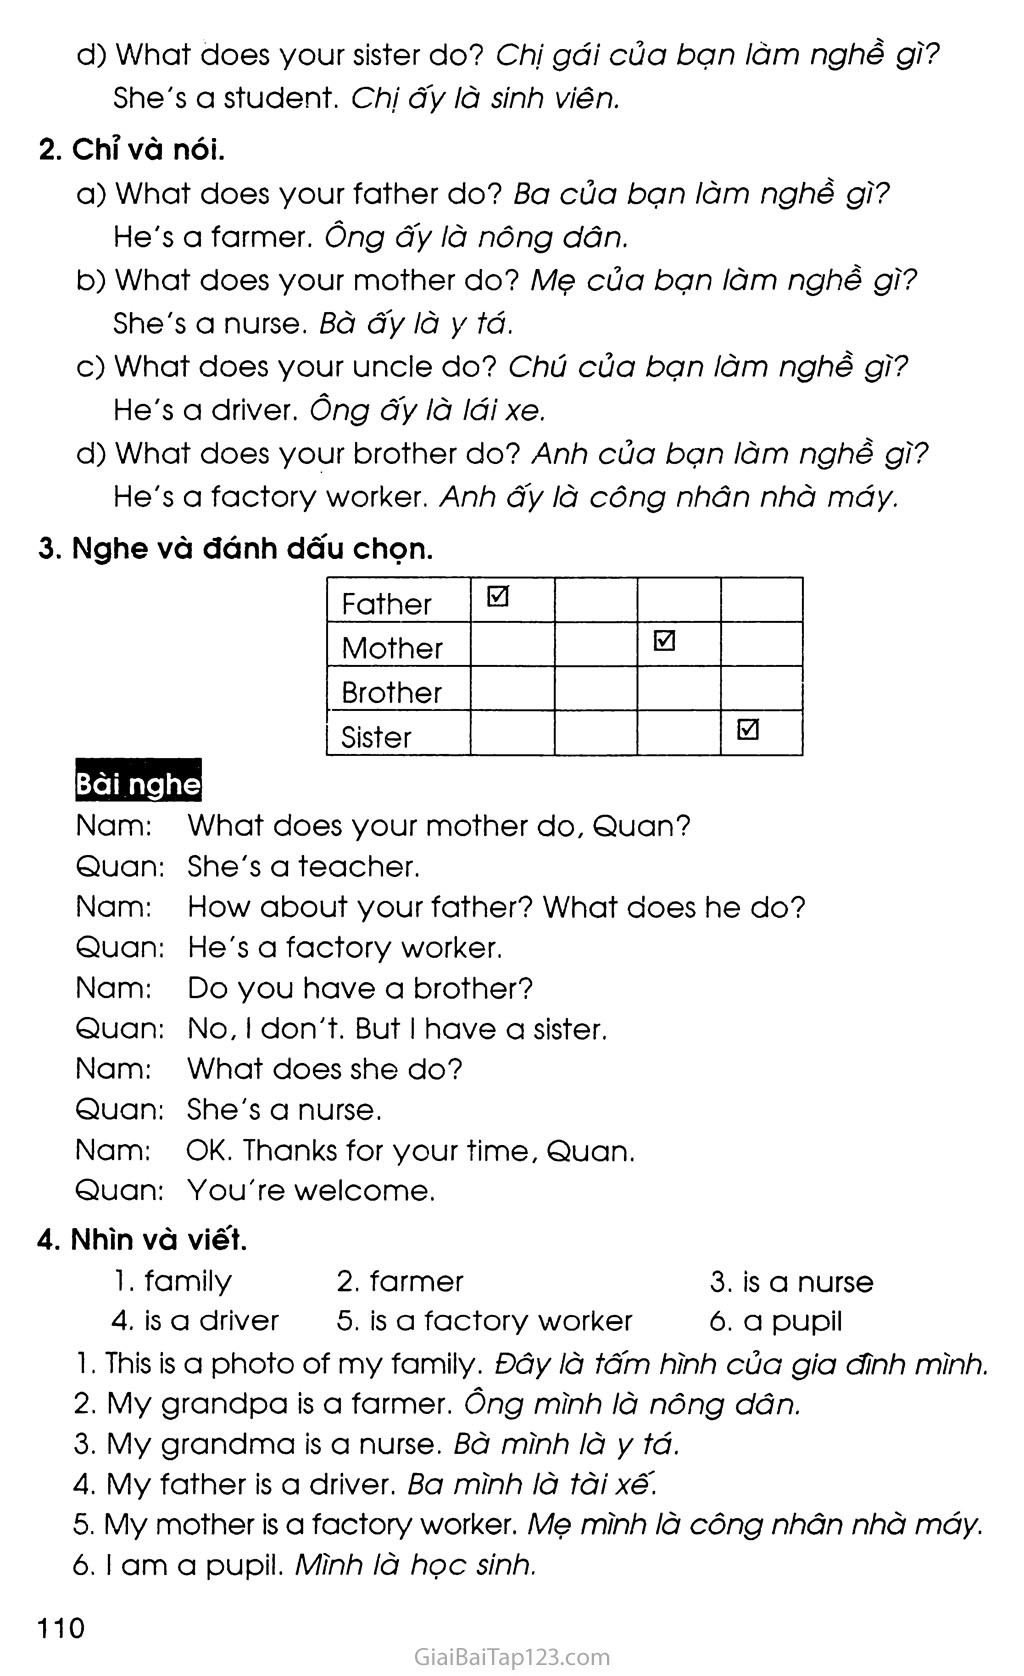 UNIT 12: WHAT DOES YOUR FATHER DO? trang 4